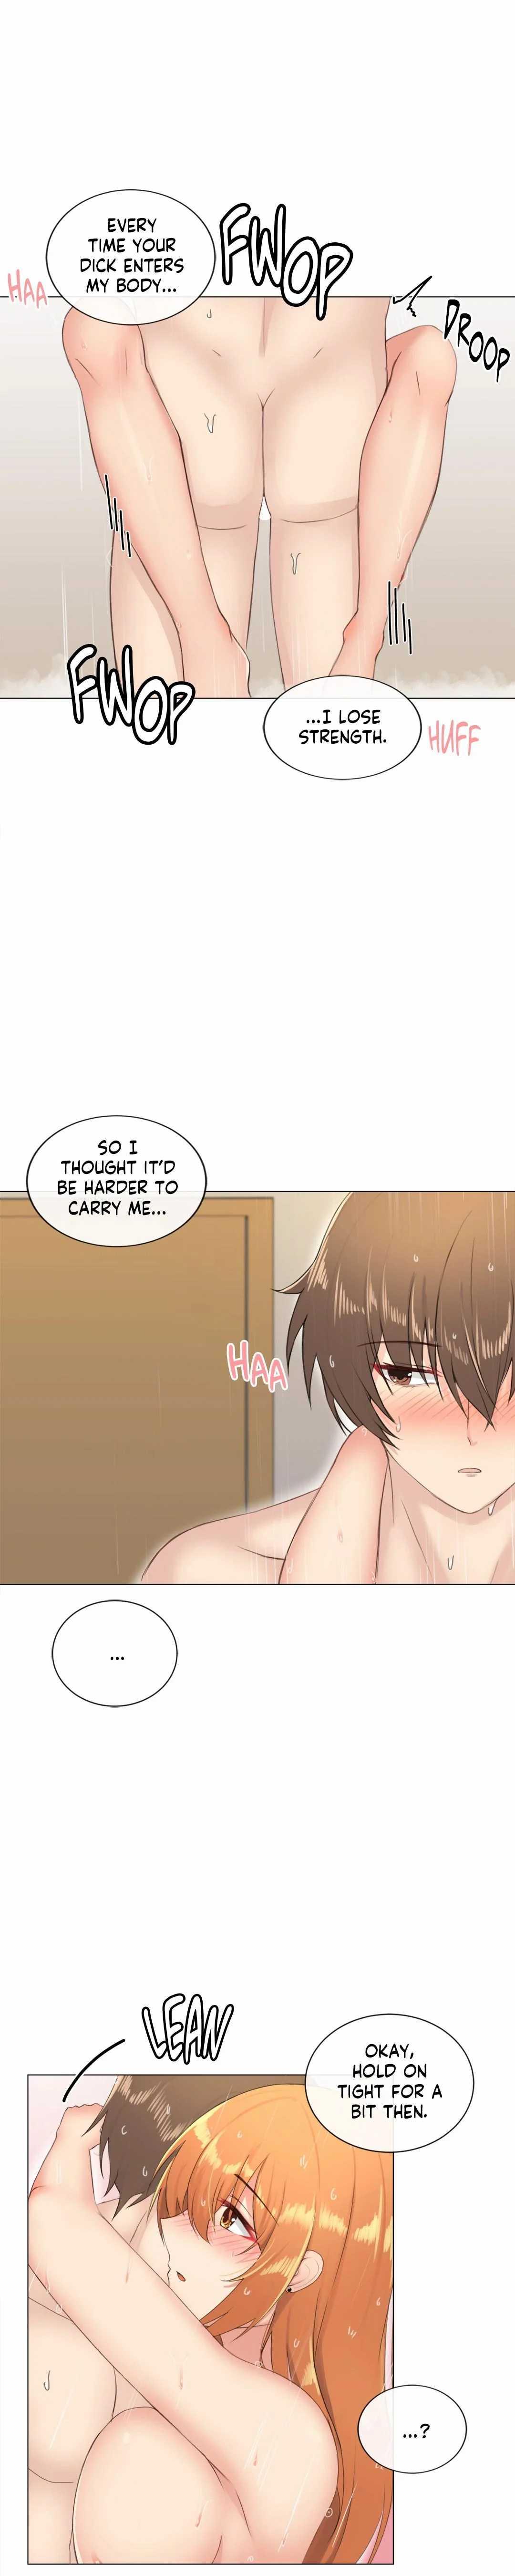 [Dumangoon, 130F] Sexcape Room: Pile Up Ch.9/9 [English] [Manhwa PDF] Completed 90